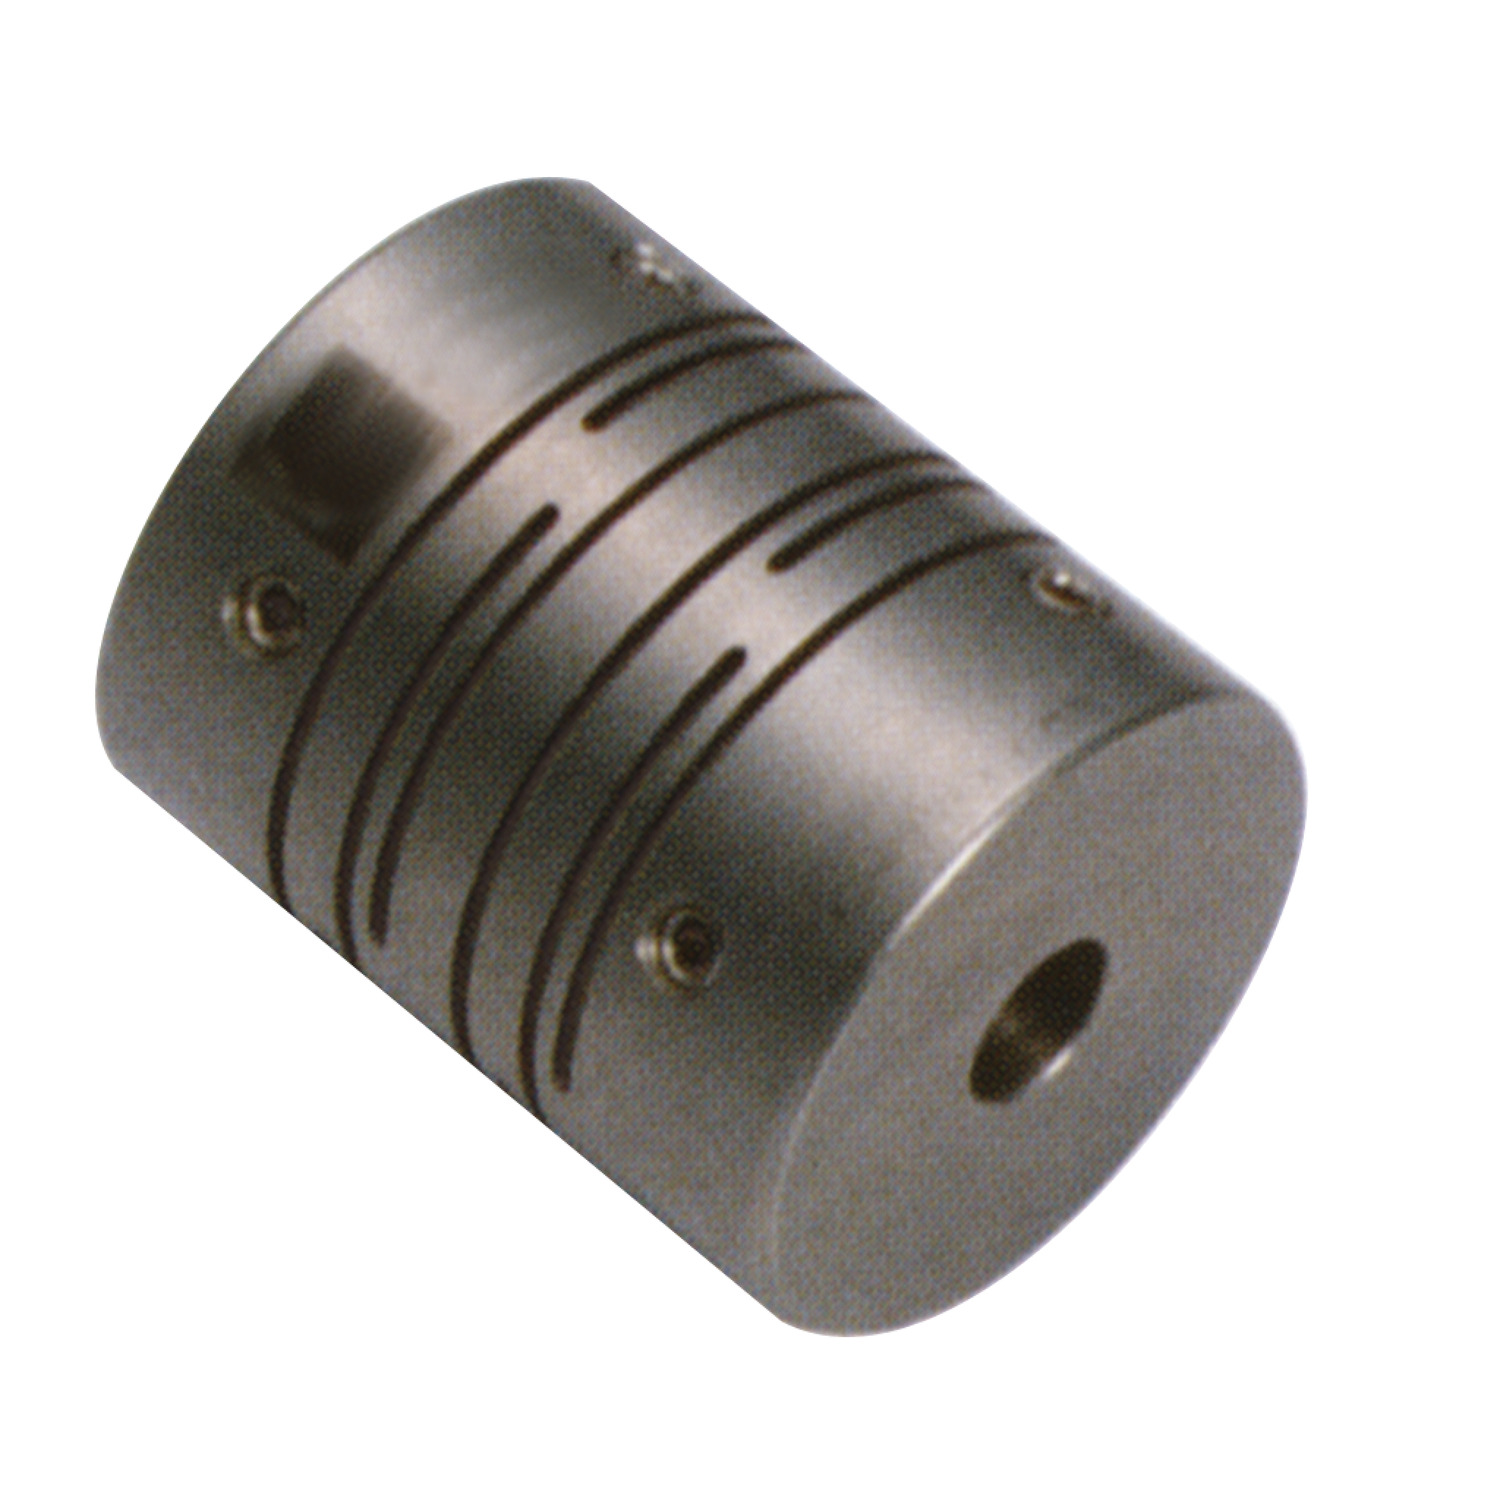 Product R3002.1, Spiral Beam Coupling - Stainless Steel set screw - long type / 